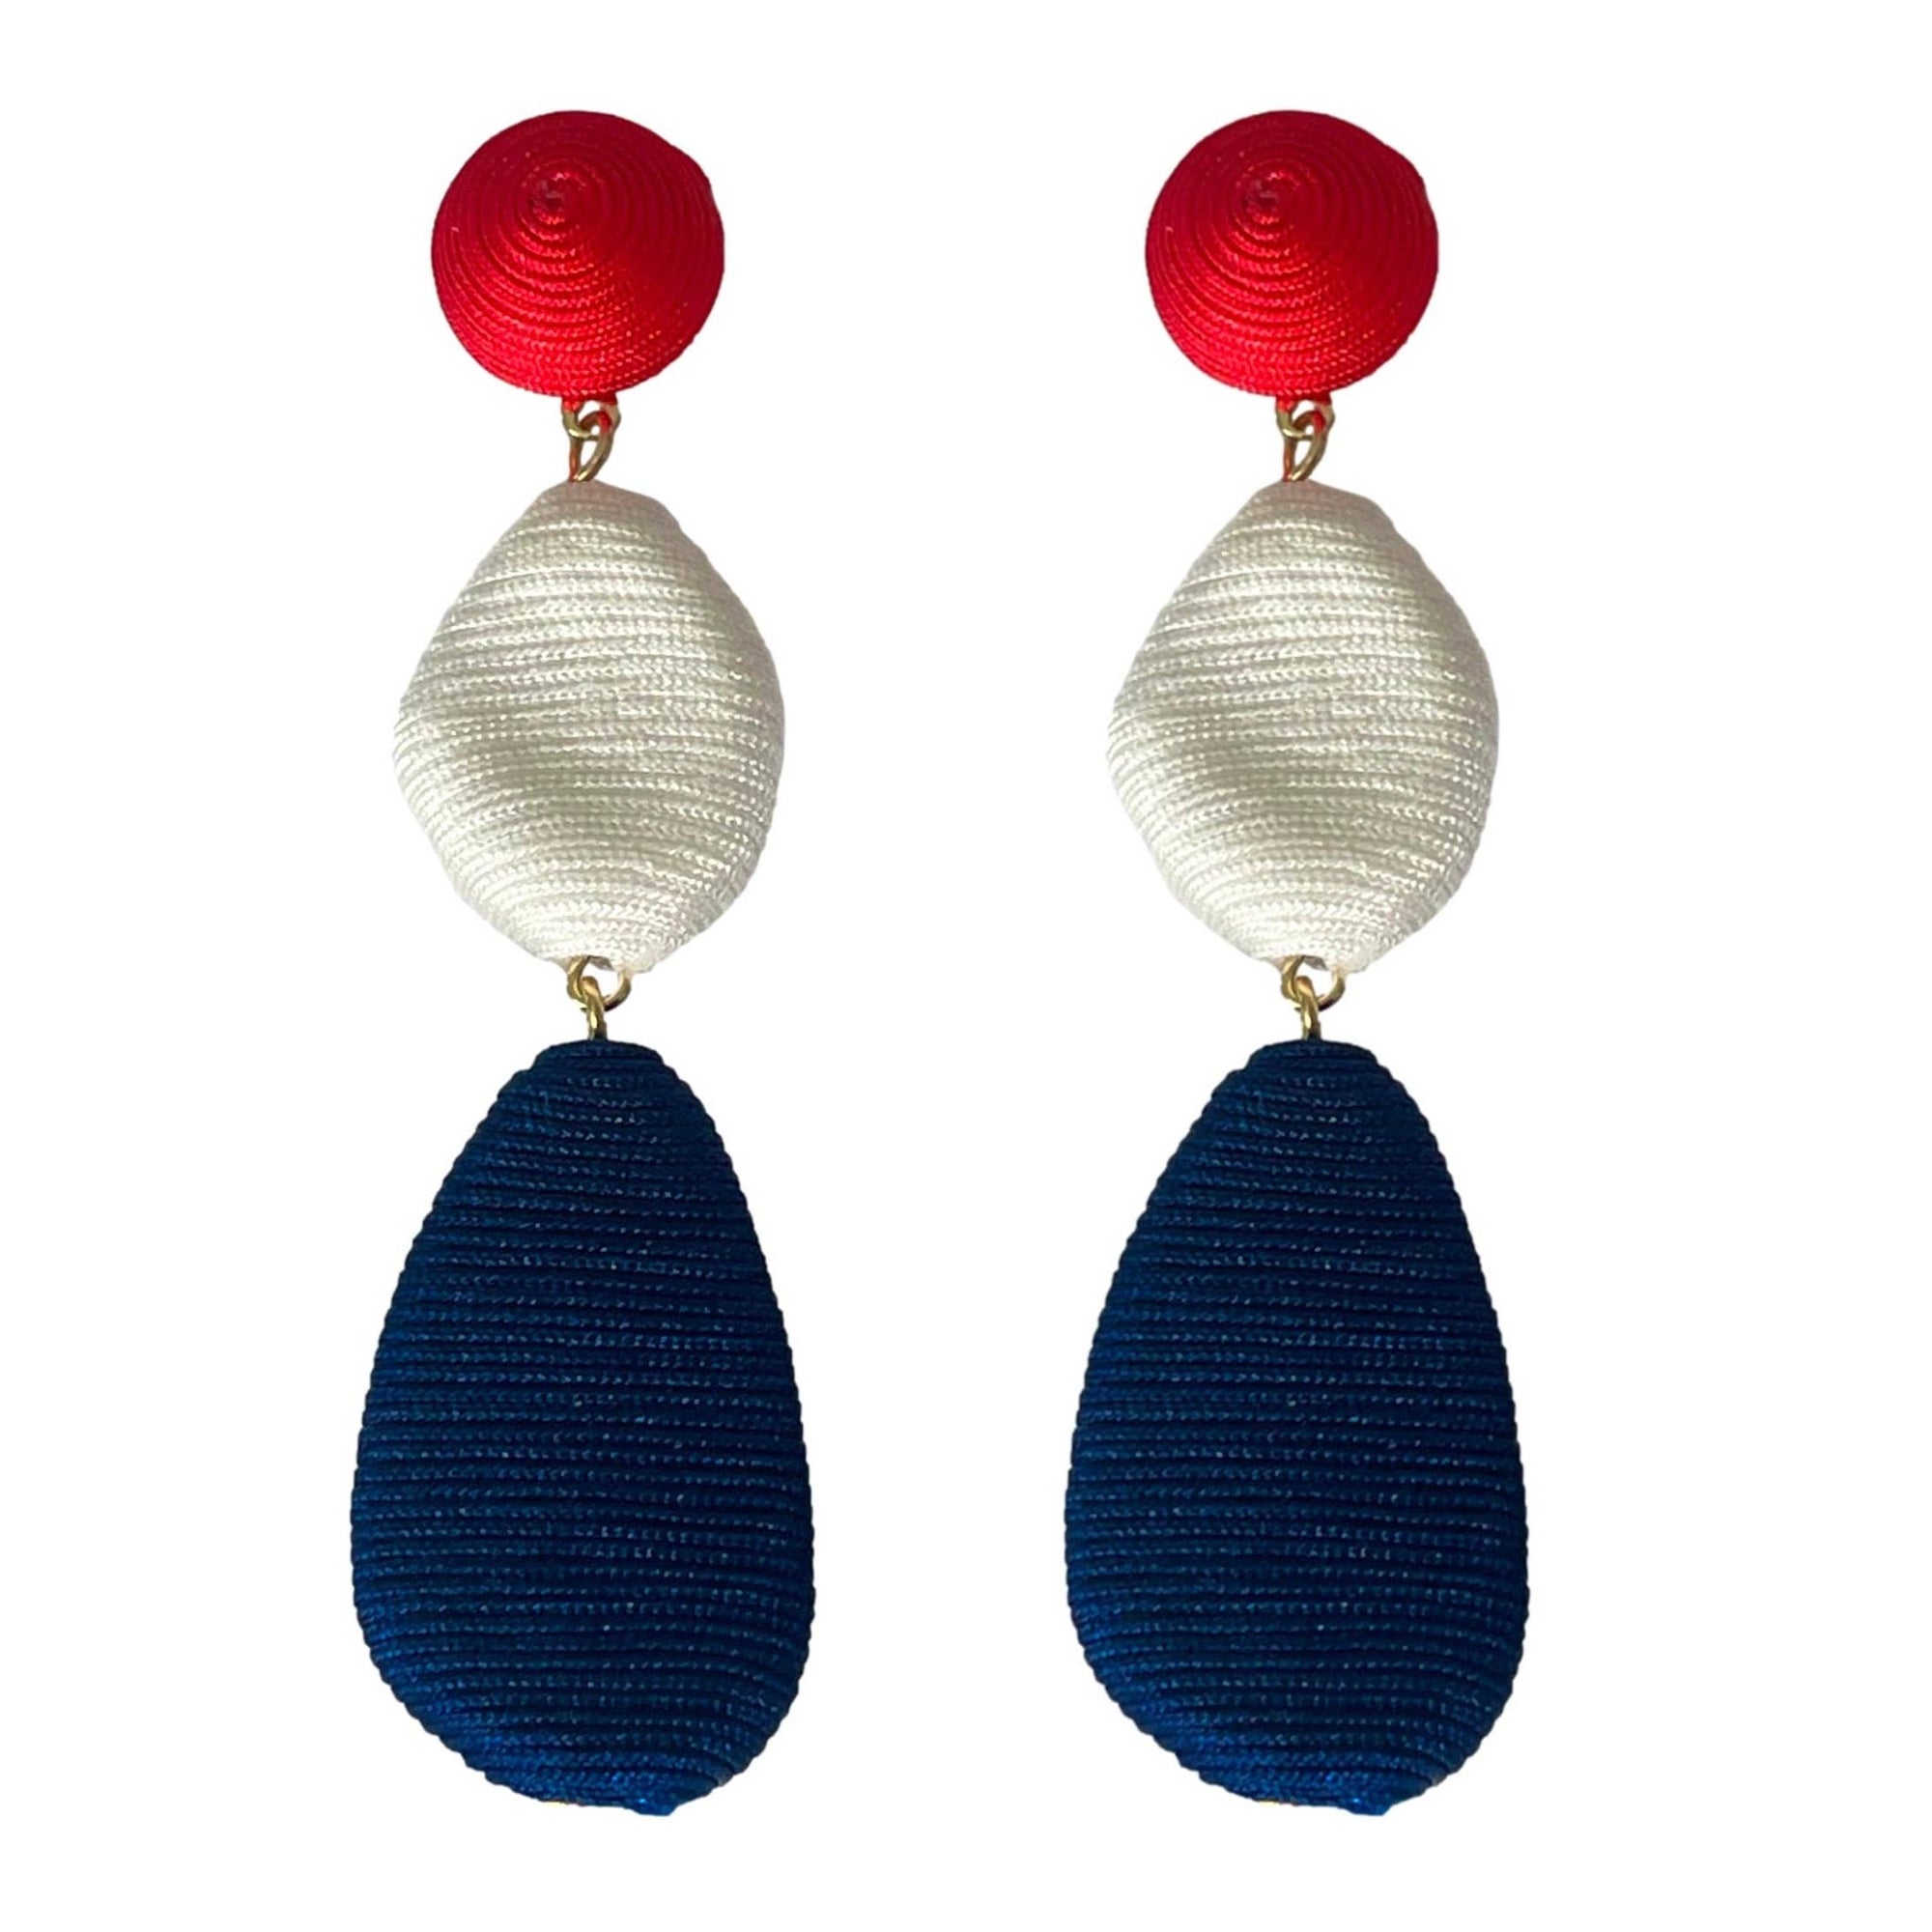 Red, White and Blue Drop Earrings